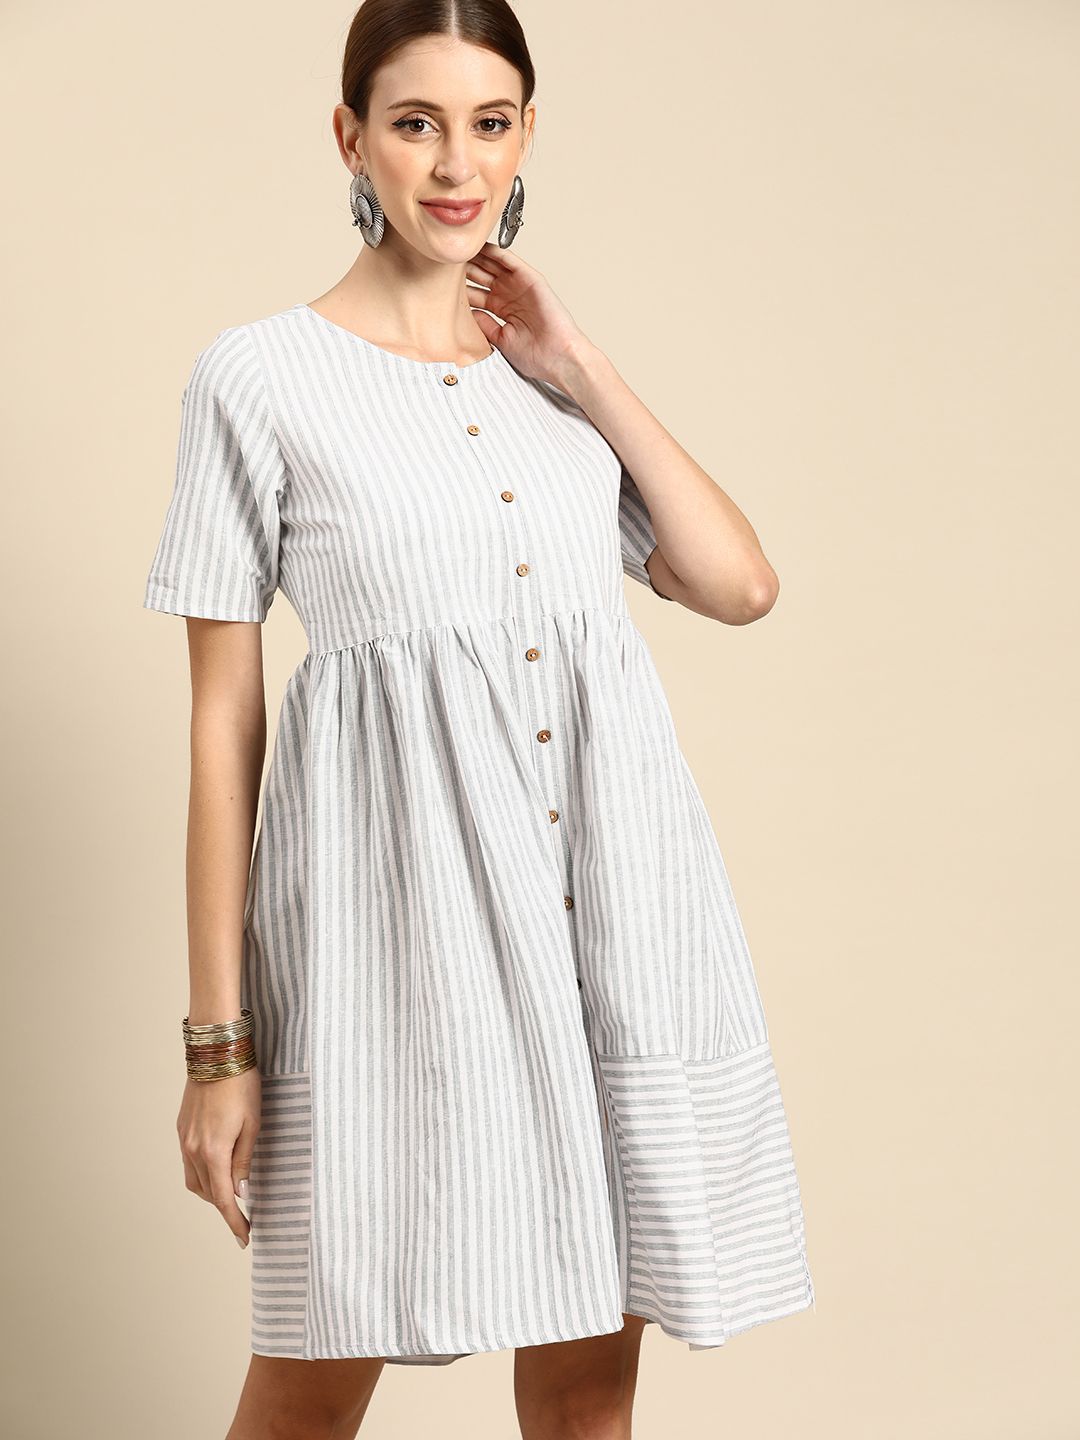 Anouk Grey & White Striped A-Line Dress Price in India